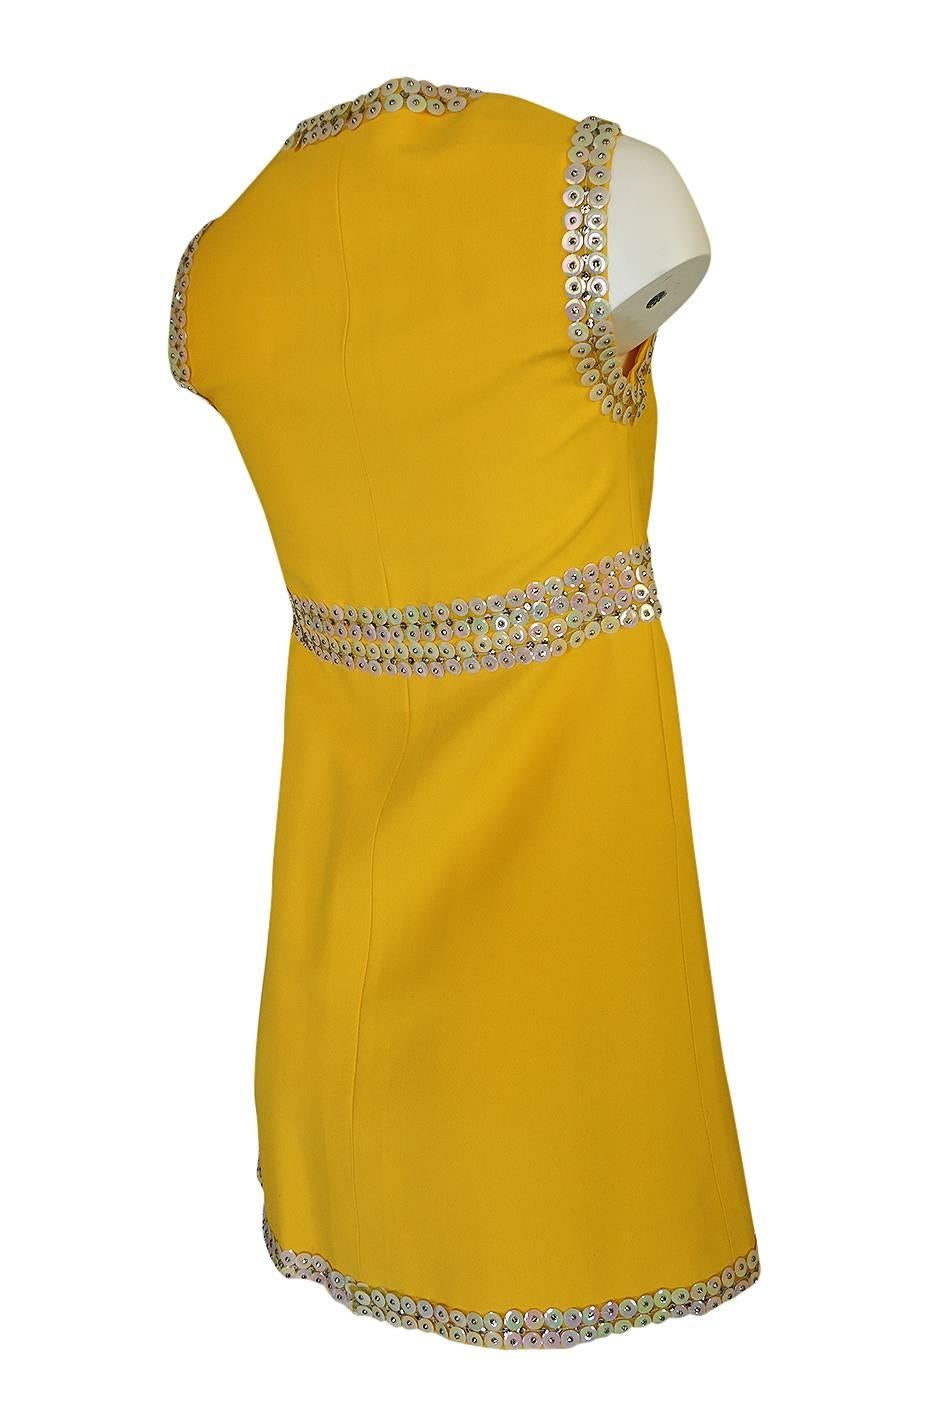 For the 1967 Chloe Collection Karl Lagerfeld did sequins, paillettes and studs on short little dresses. Examples of that collection are held in museums around the world. This wonderful little dress is truly exceptional. I love the bright yellow